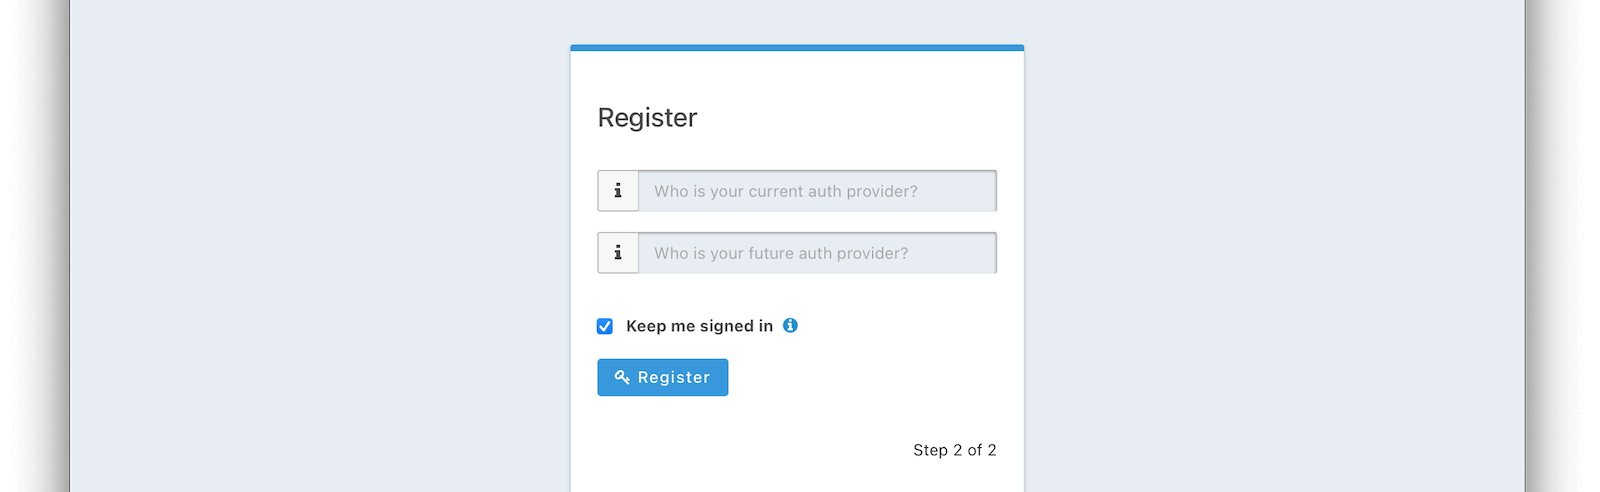 Self-Service registration example blank form step